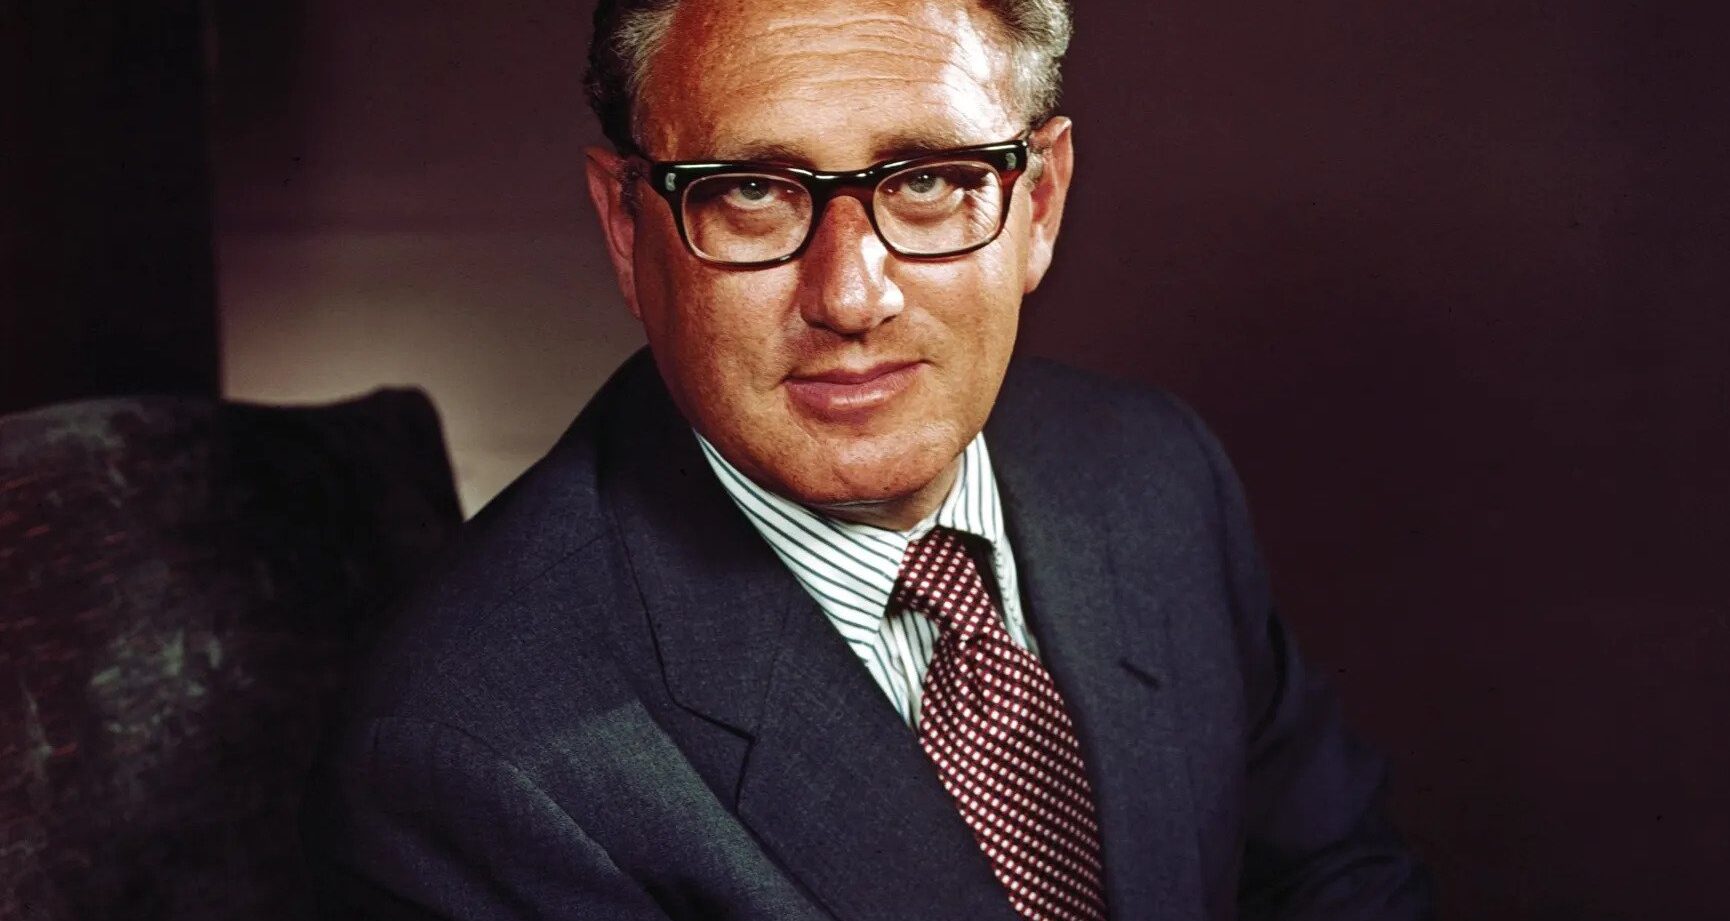 Leadership : Six Studies in World Strategy by Henry Kissinger